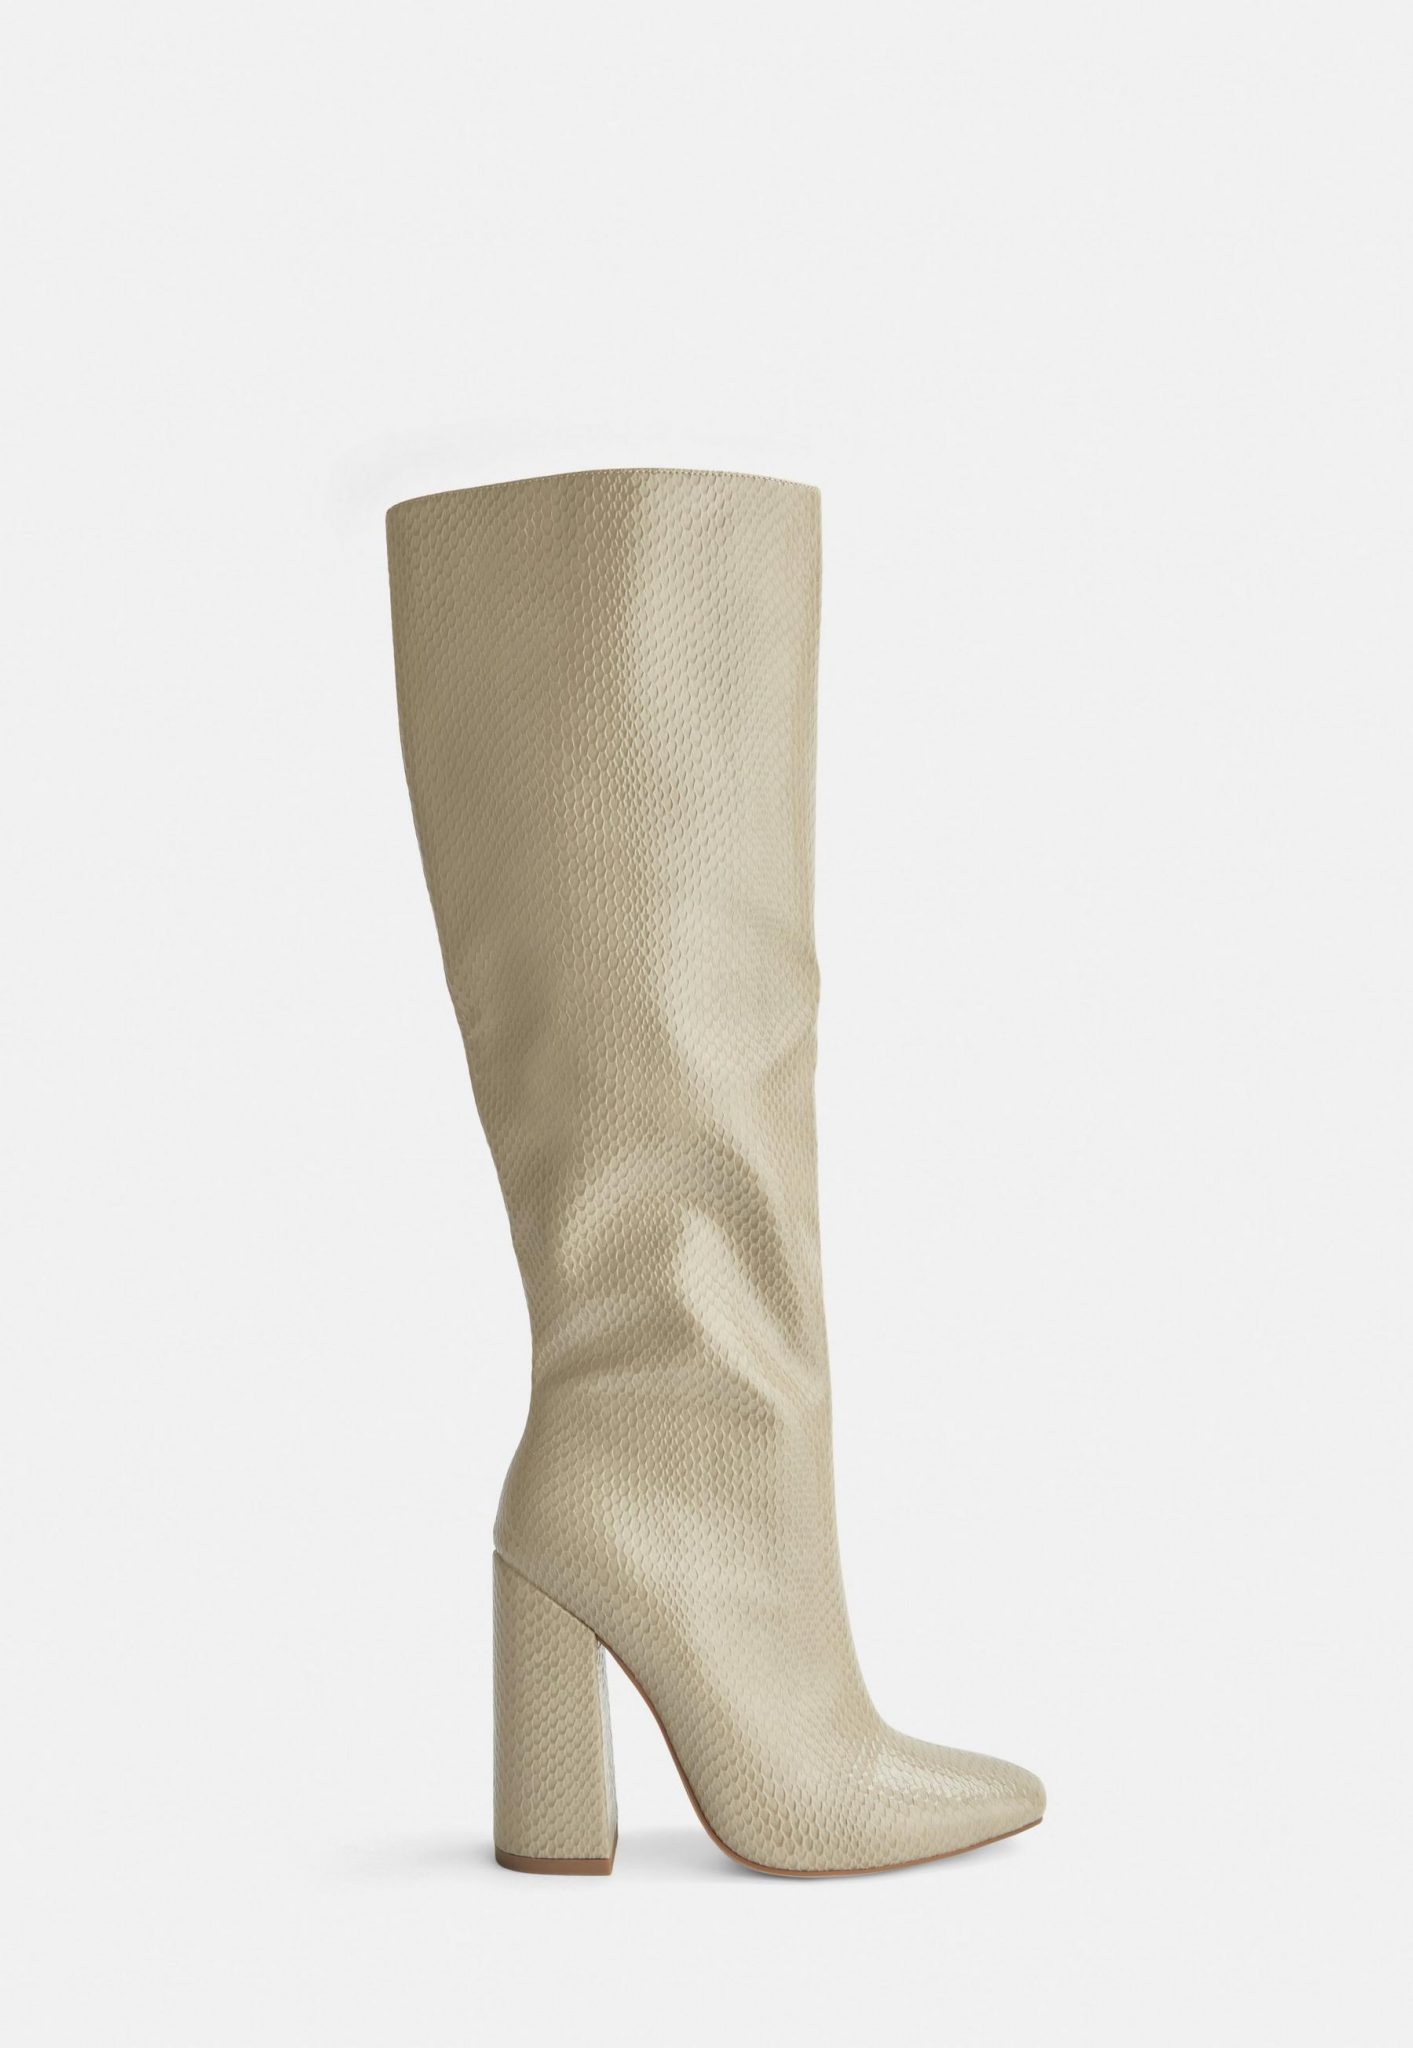 Trend Alert: Knee High Boots - Holy Chic